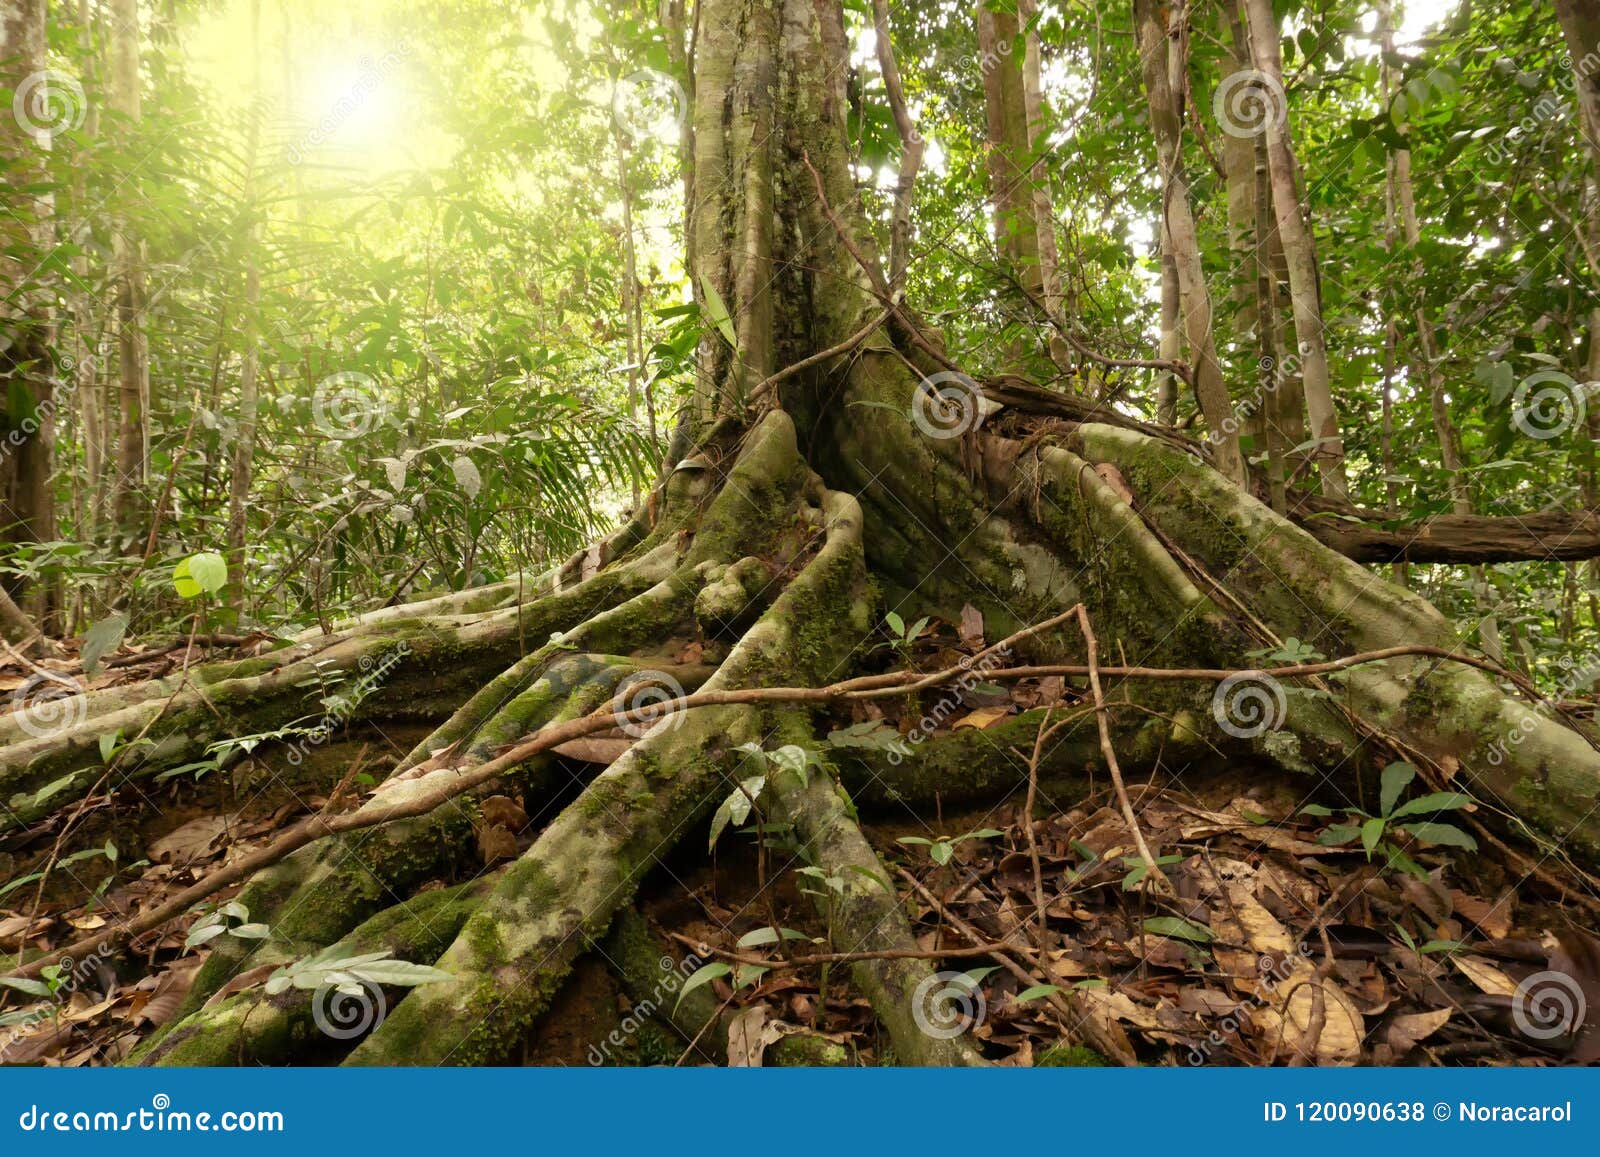 buttress roots at maliau basin conservation area